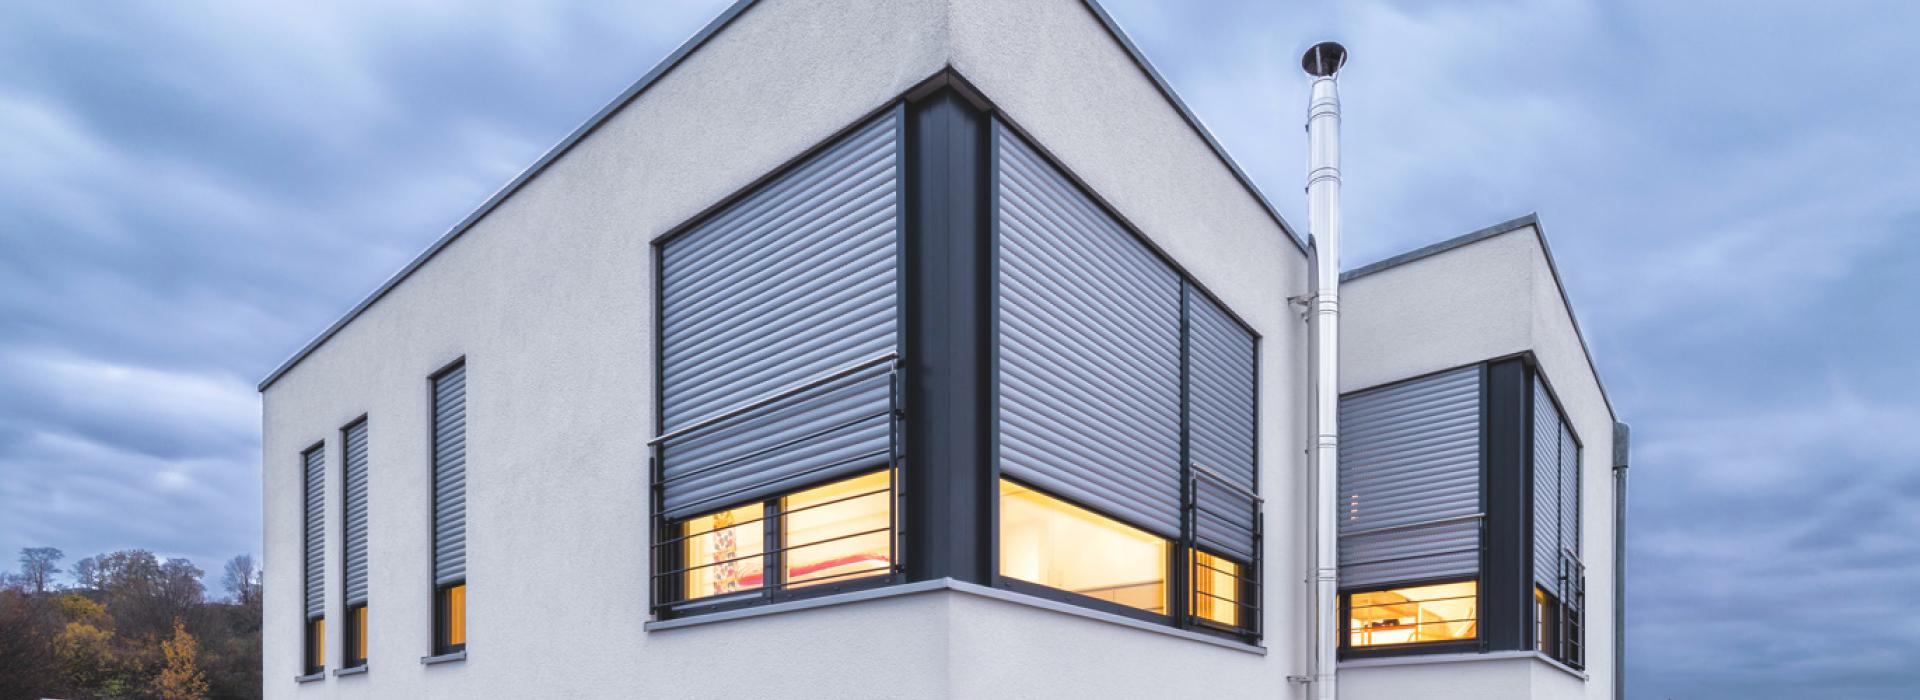 Single-family home detailed view window with nearly closed roller shutters